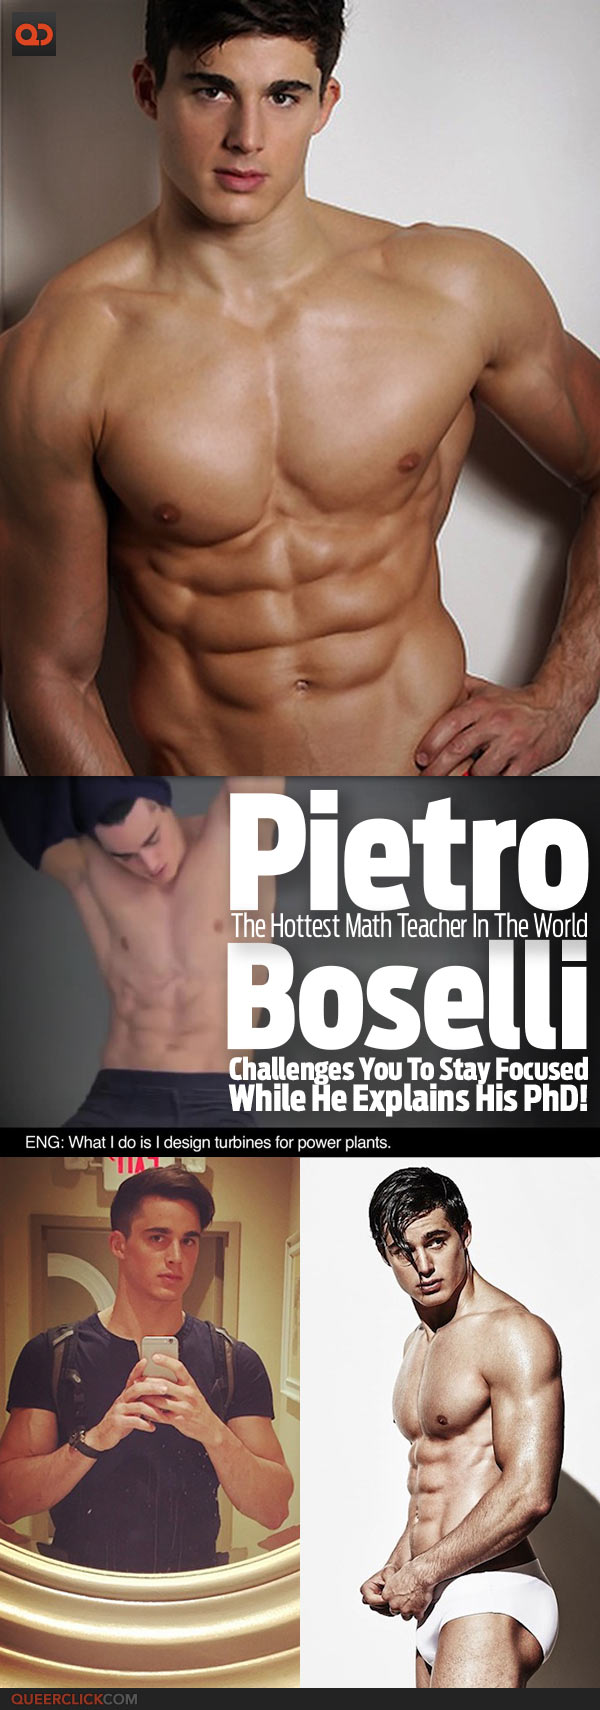 Pietro Boselli, The Hottest Maths Teacher In The World, Challenges You To Stay Focused While He Explains His PhD!